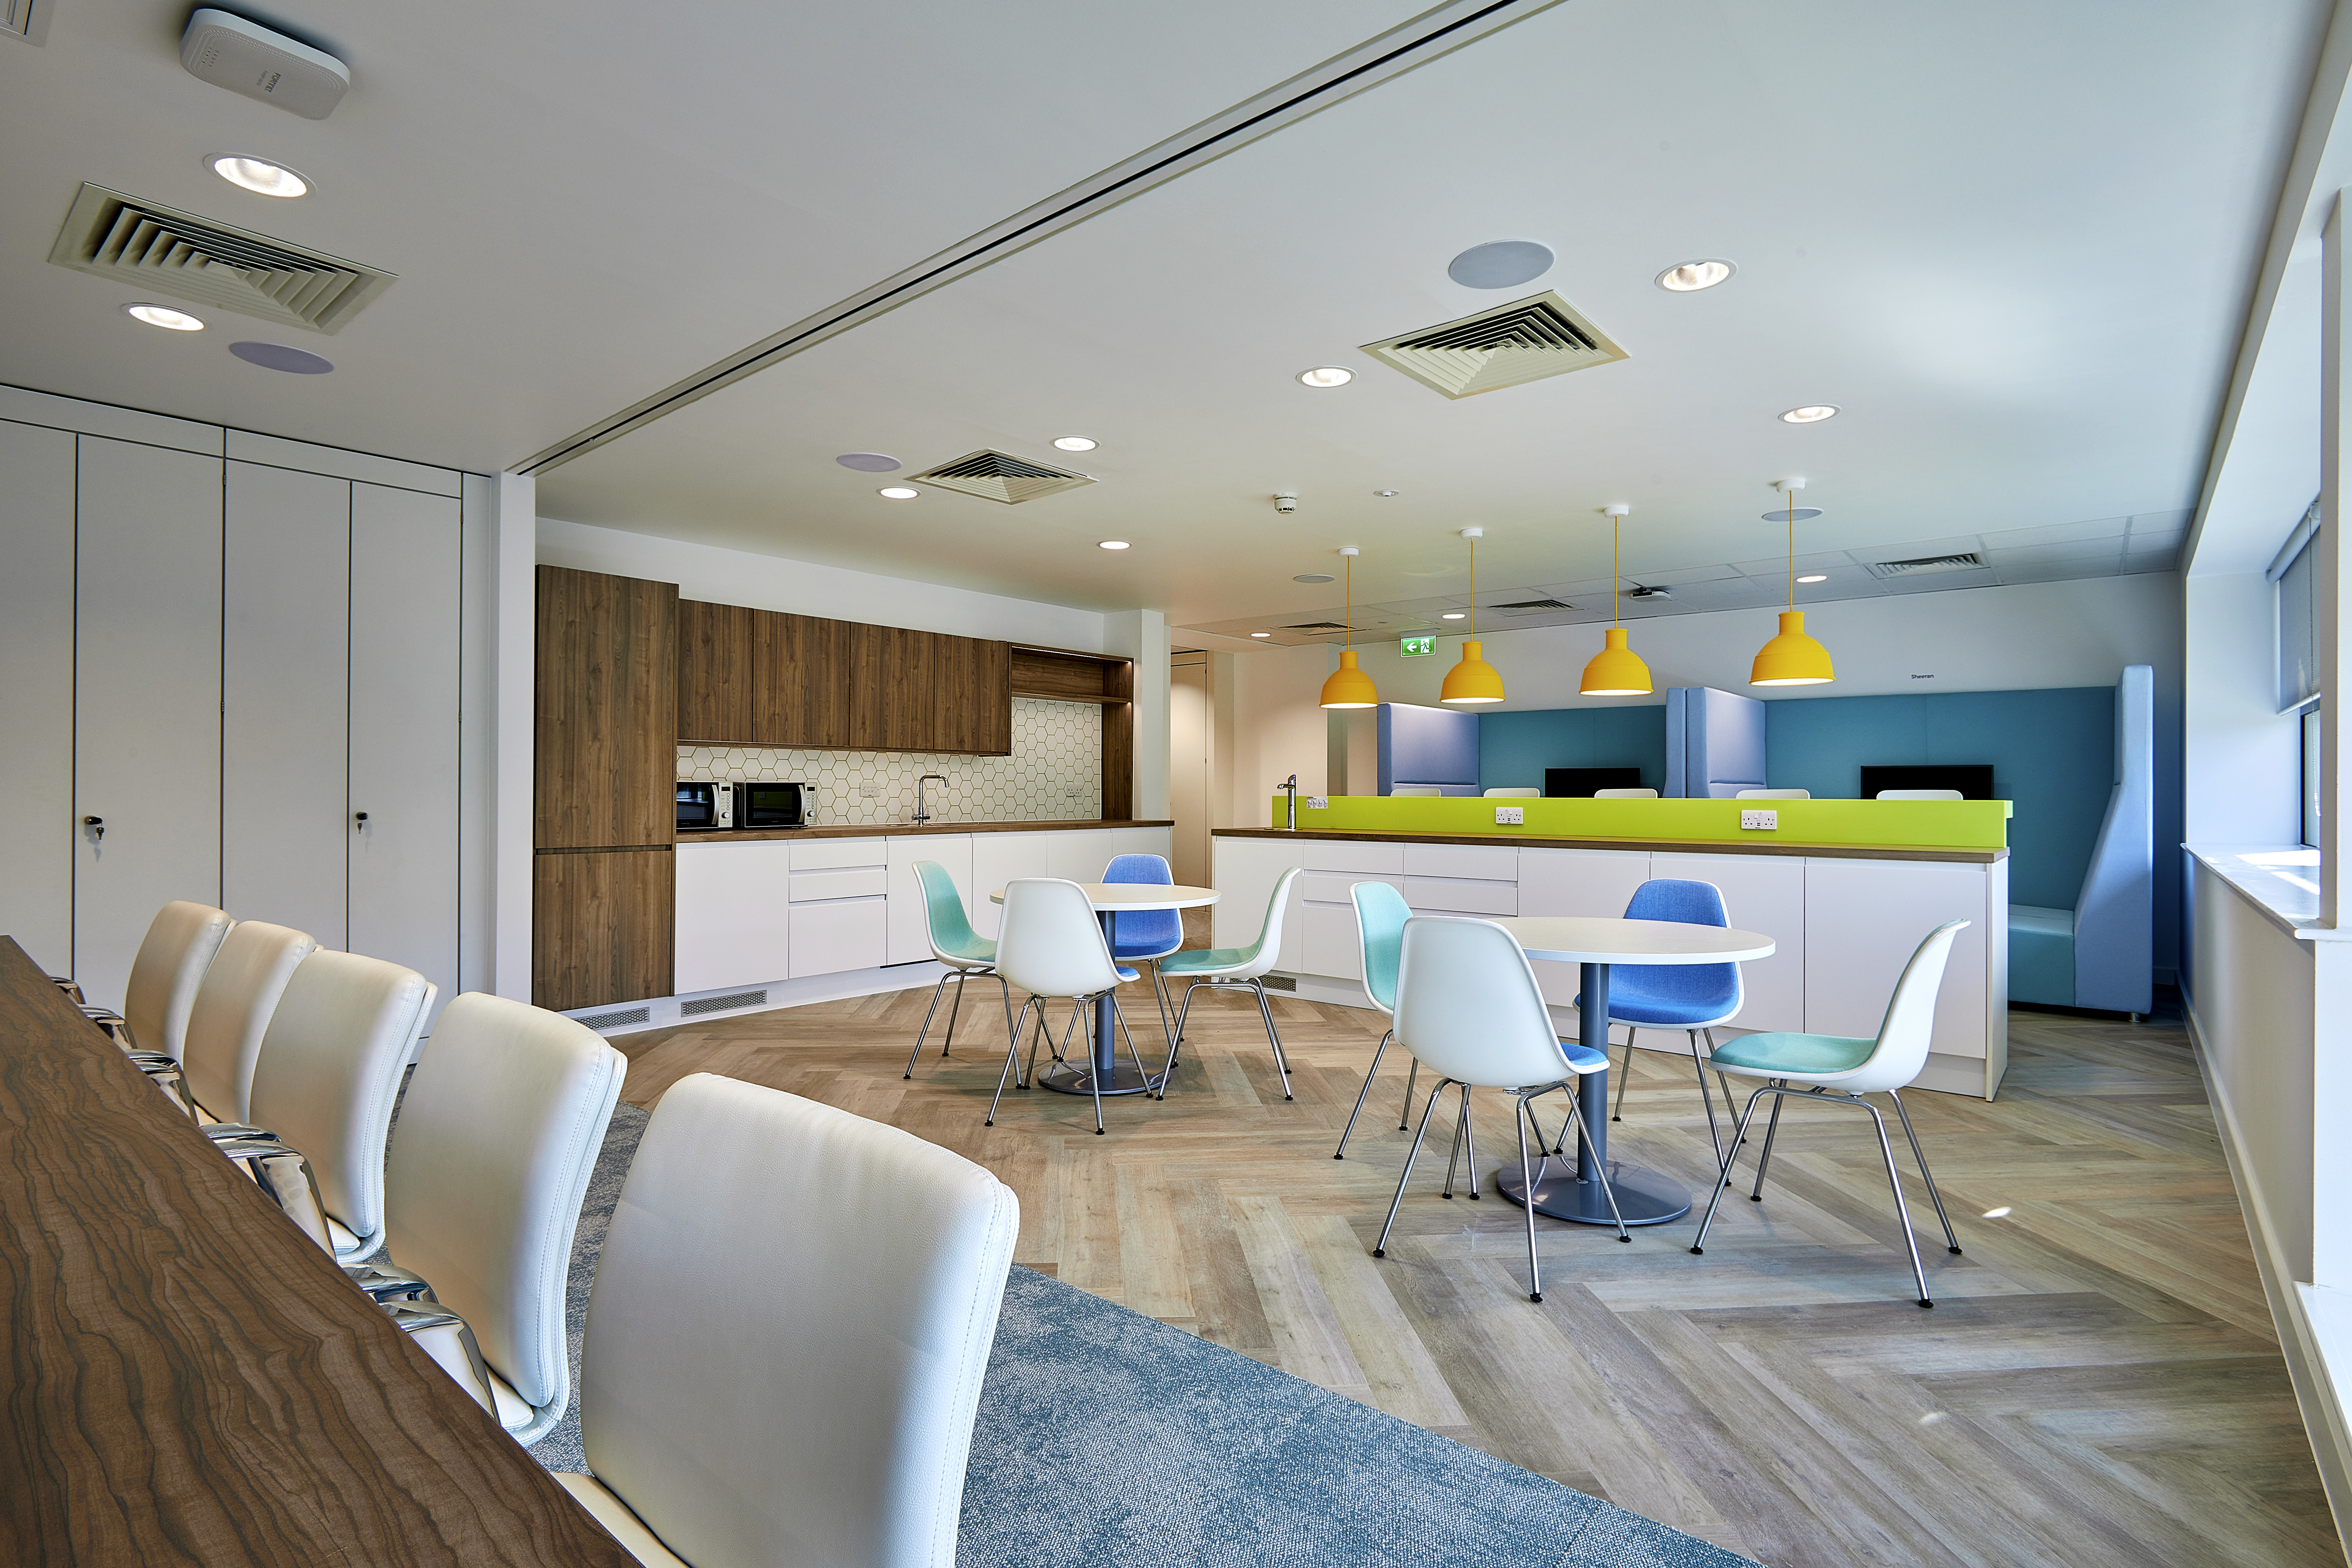 Award winning kitchen in office fit out